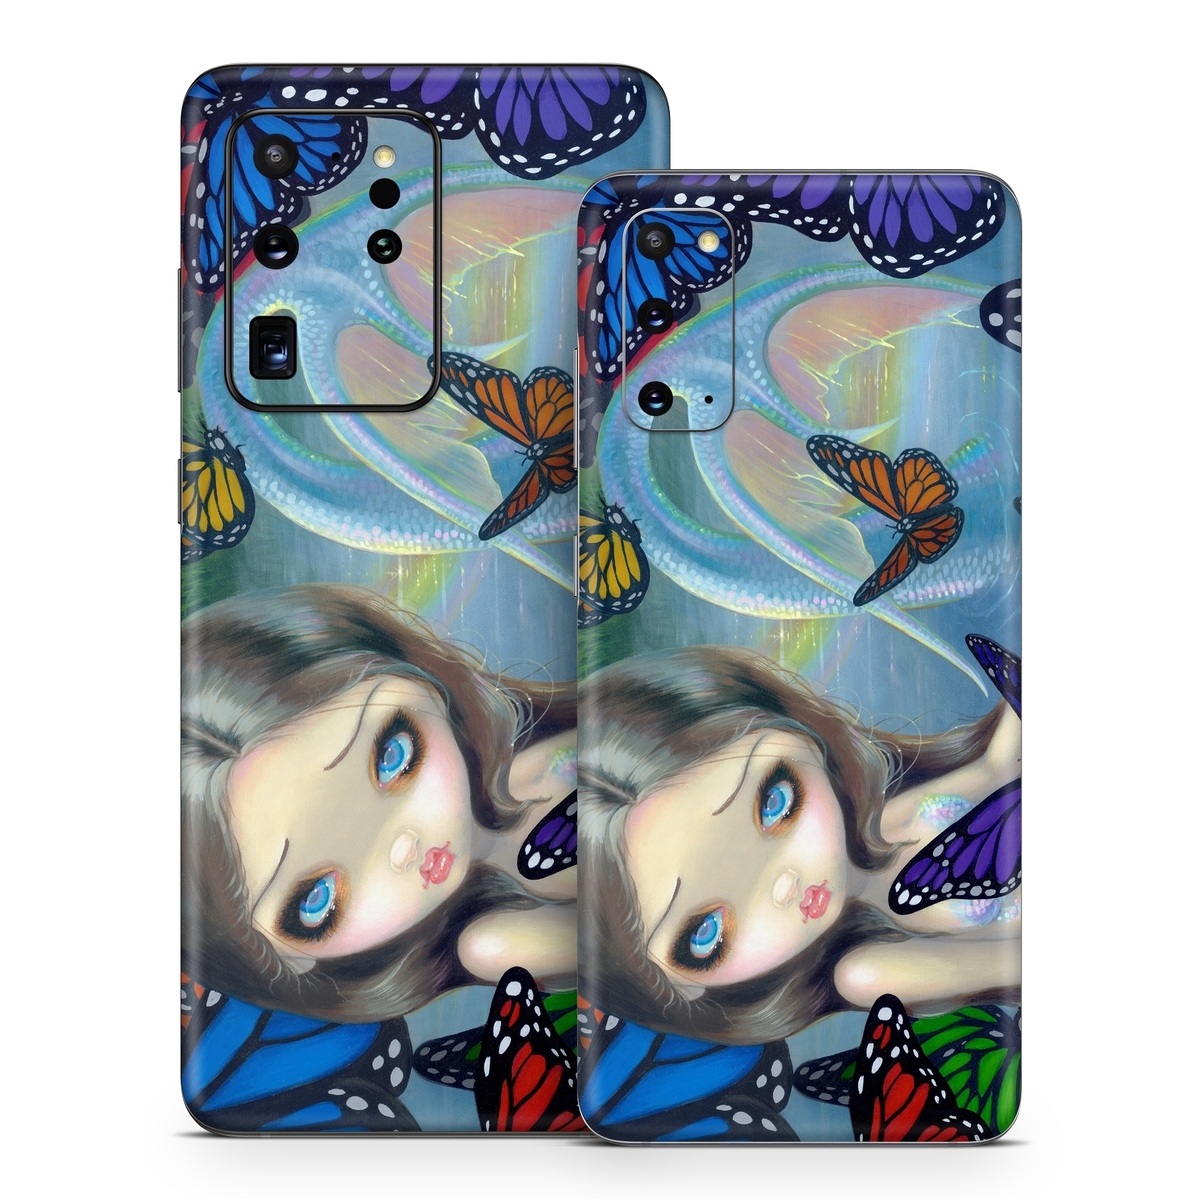 Samsung Galaxy S20 Series Skin design of Butterfly, Insect, Monarch butterfly, Moths and butterflies, Cynthia (subgenus), Invertebrate, Pollinator, Brush-footed butterfly, Organism, Art, with gray, black, blue, red, pink colors